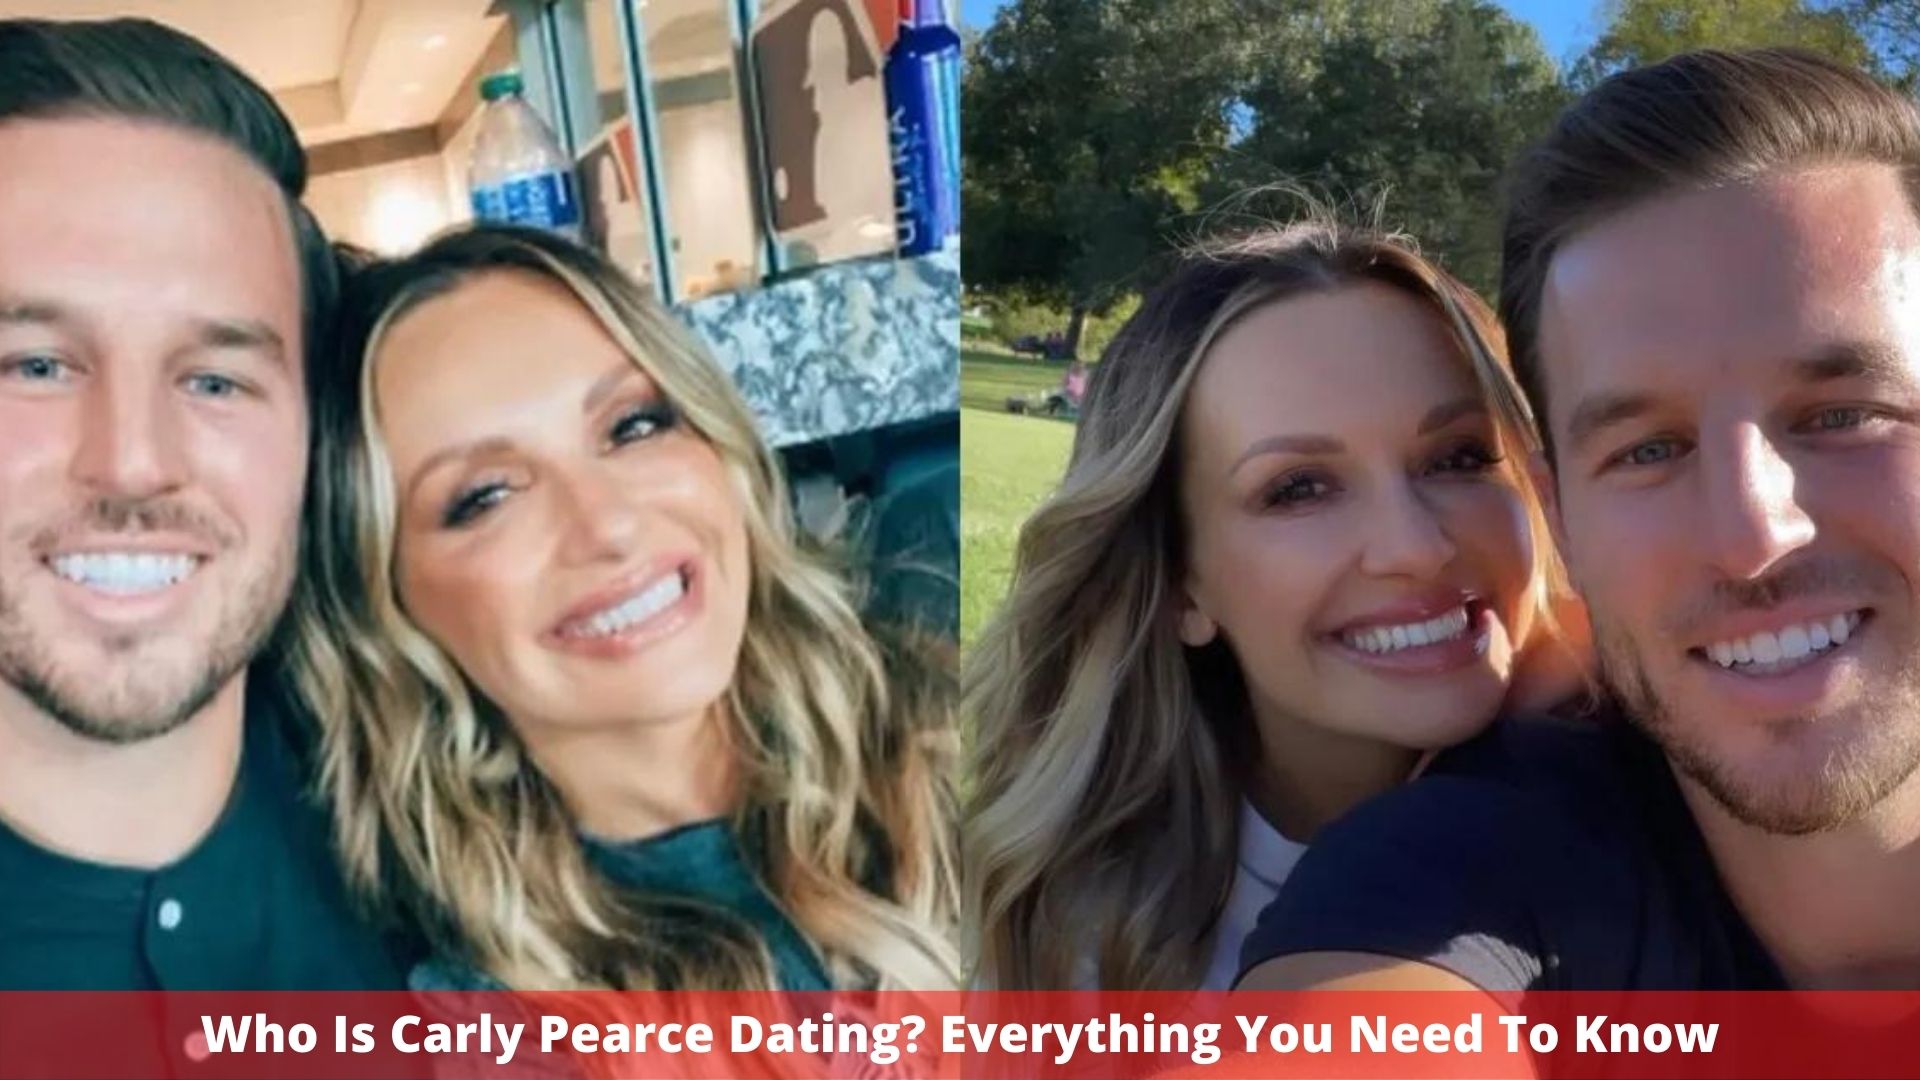 Who Is Carly Pearce Dating? Everything You Need To Know